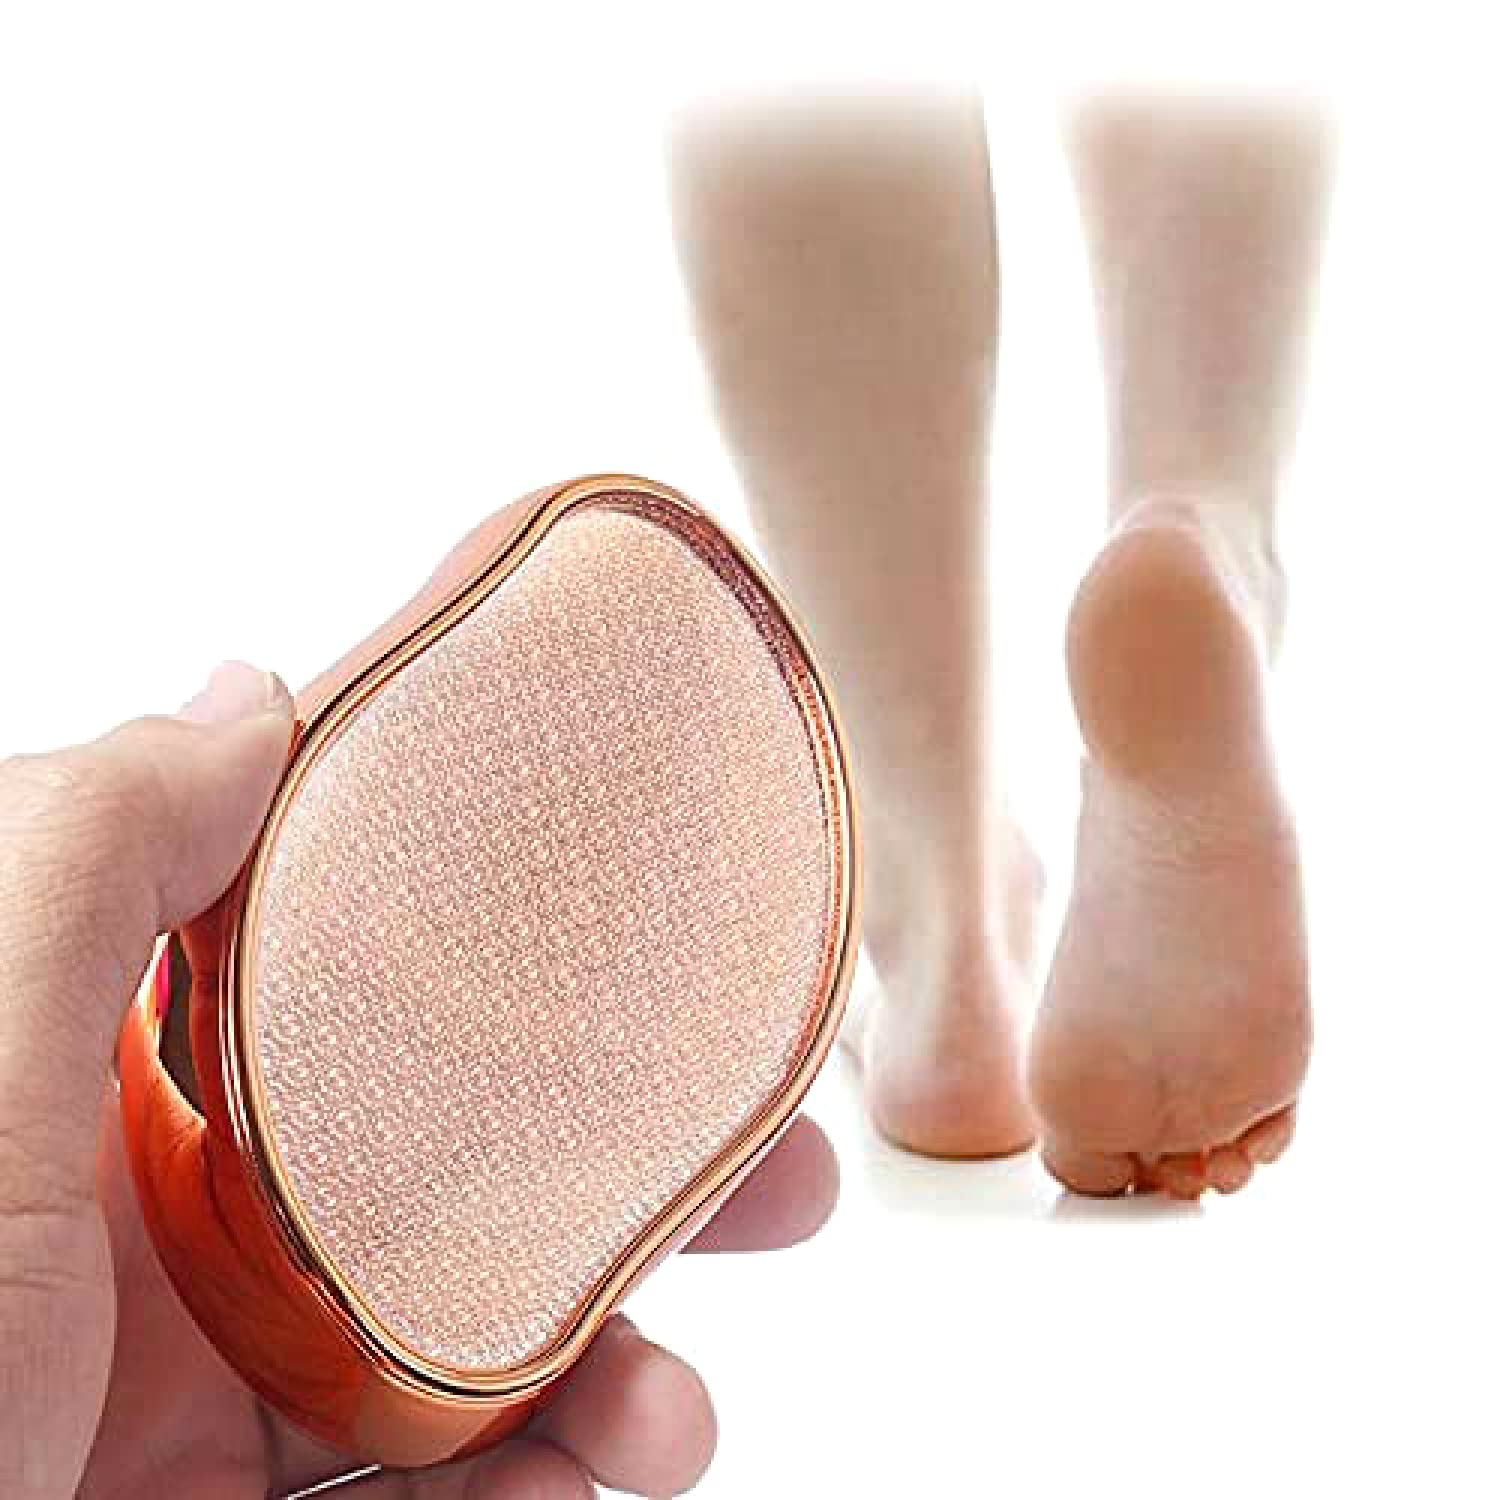 Dr Foot Glass File Callus Remover | For Feet, Dead Skin, Callus Remover | NANO GLASS CRYSTAL Removes Hard Skin, Leaves Feet Smooth | Foot Scraper Rasp LATEST INNOVATION - ROSE GOLD (Pack of 5)